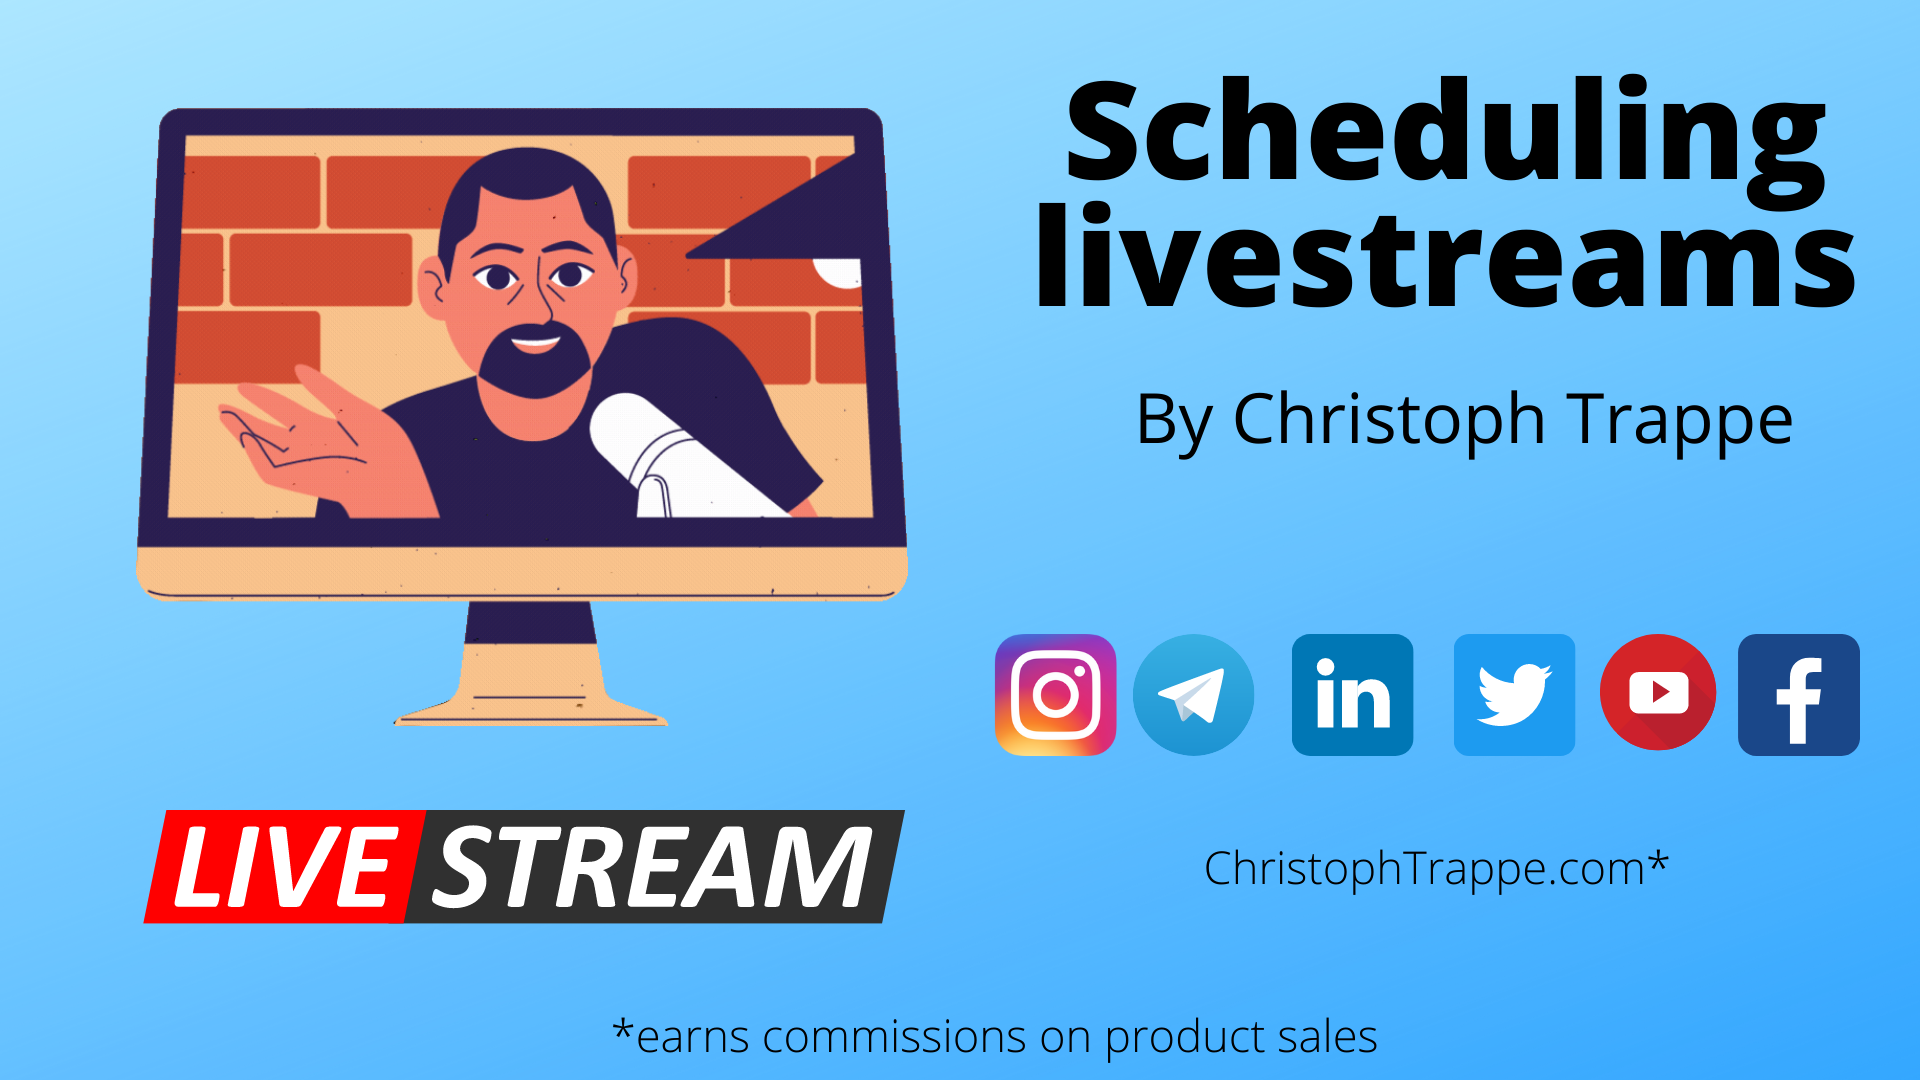 How to schedule social media livestreams to Facebook, YouTube, Twitter, LinkedIn and Instagram